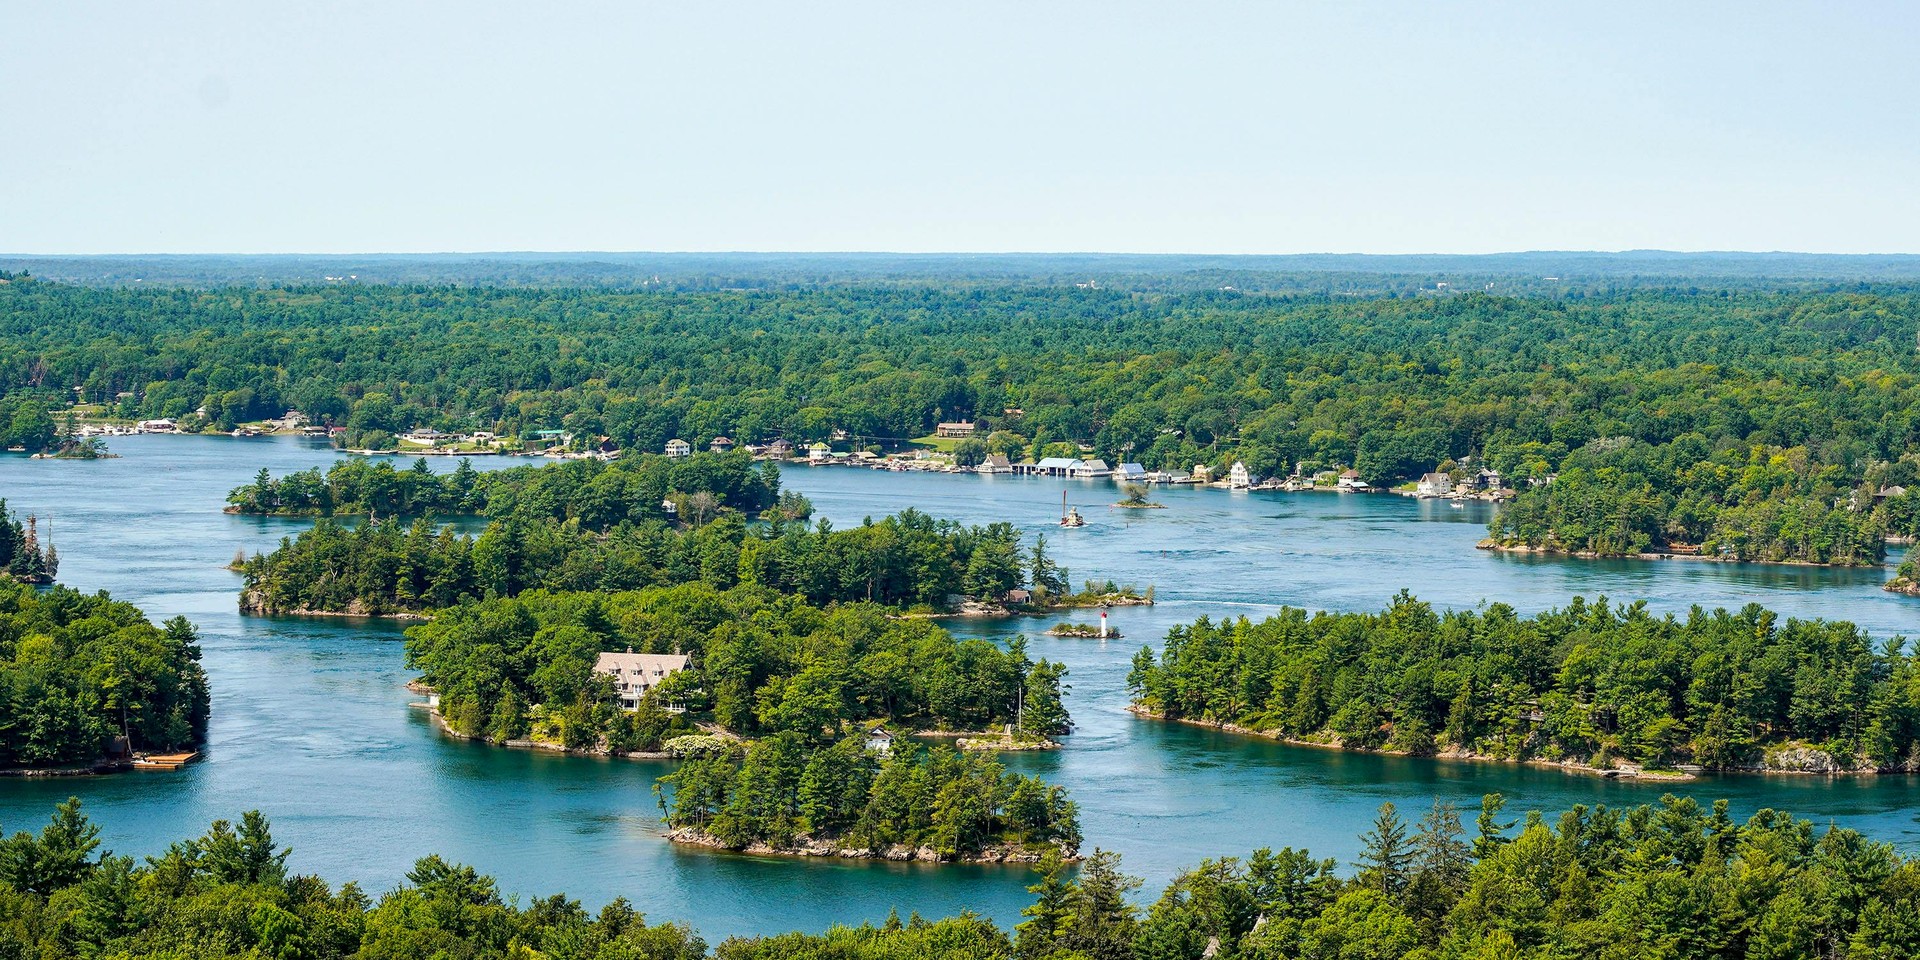 A WEEKEND GETAWAY TO THE THOUSAND ISLANDS